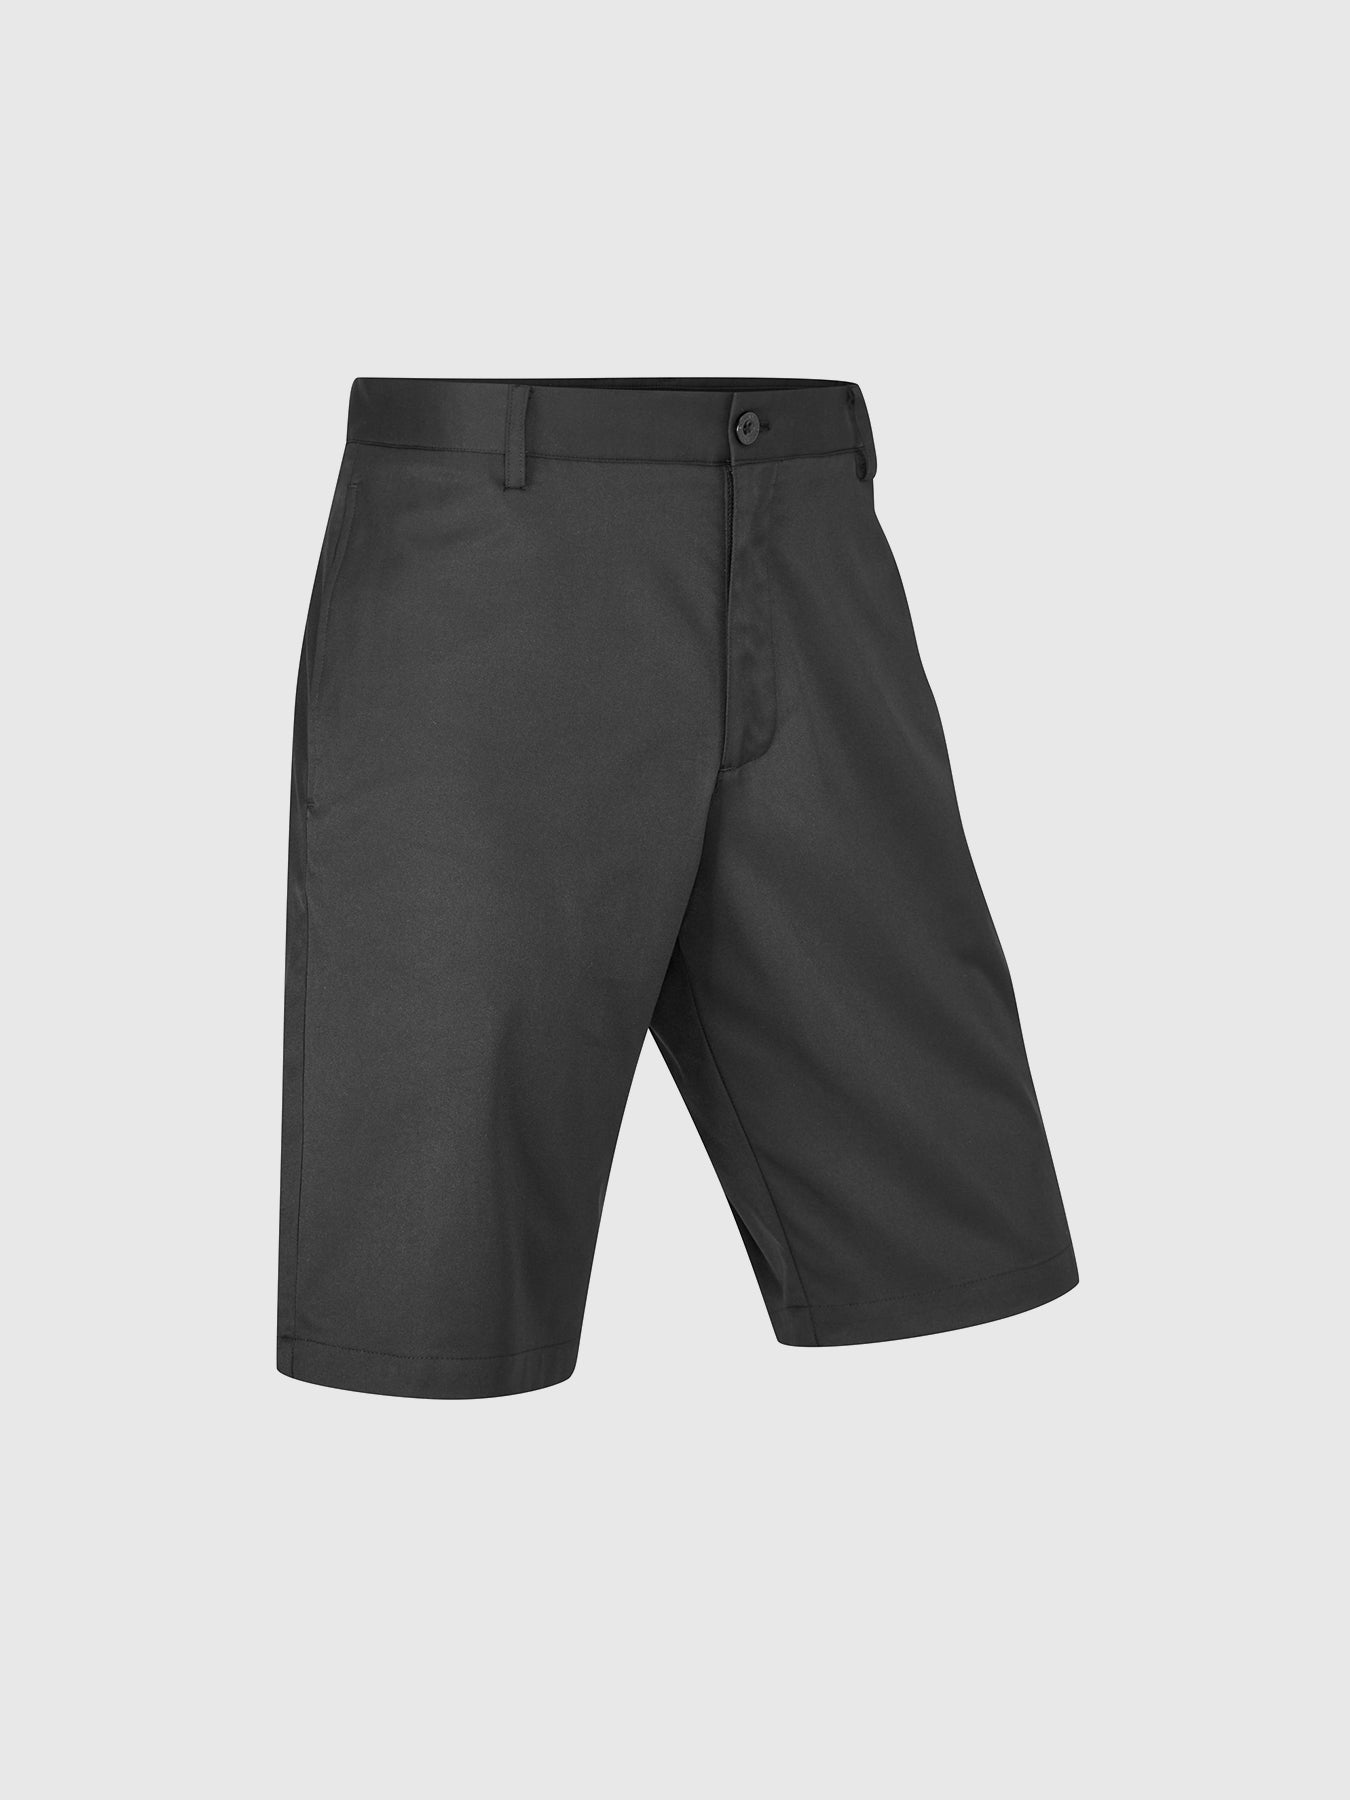 Farah Jester Performance Piped Golf Shorts In Black